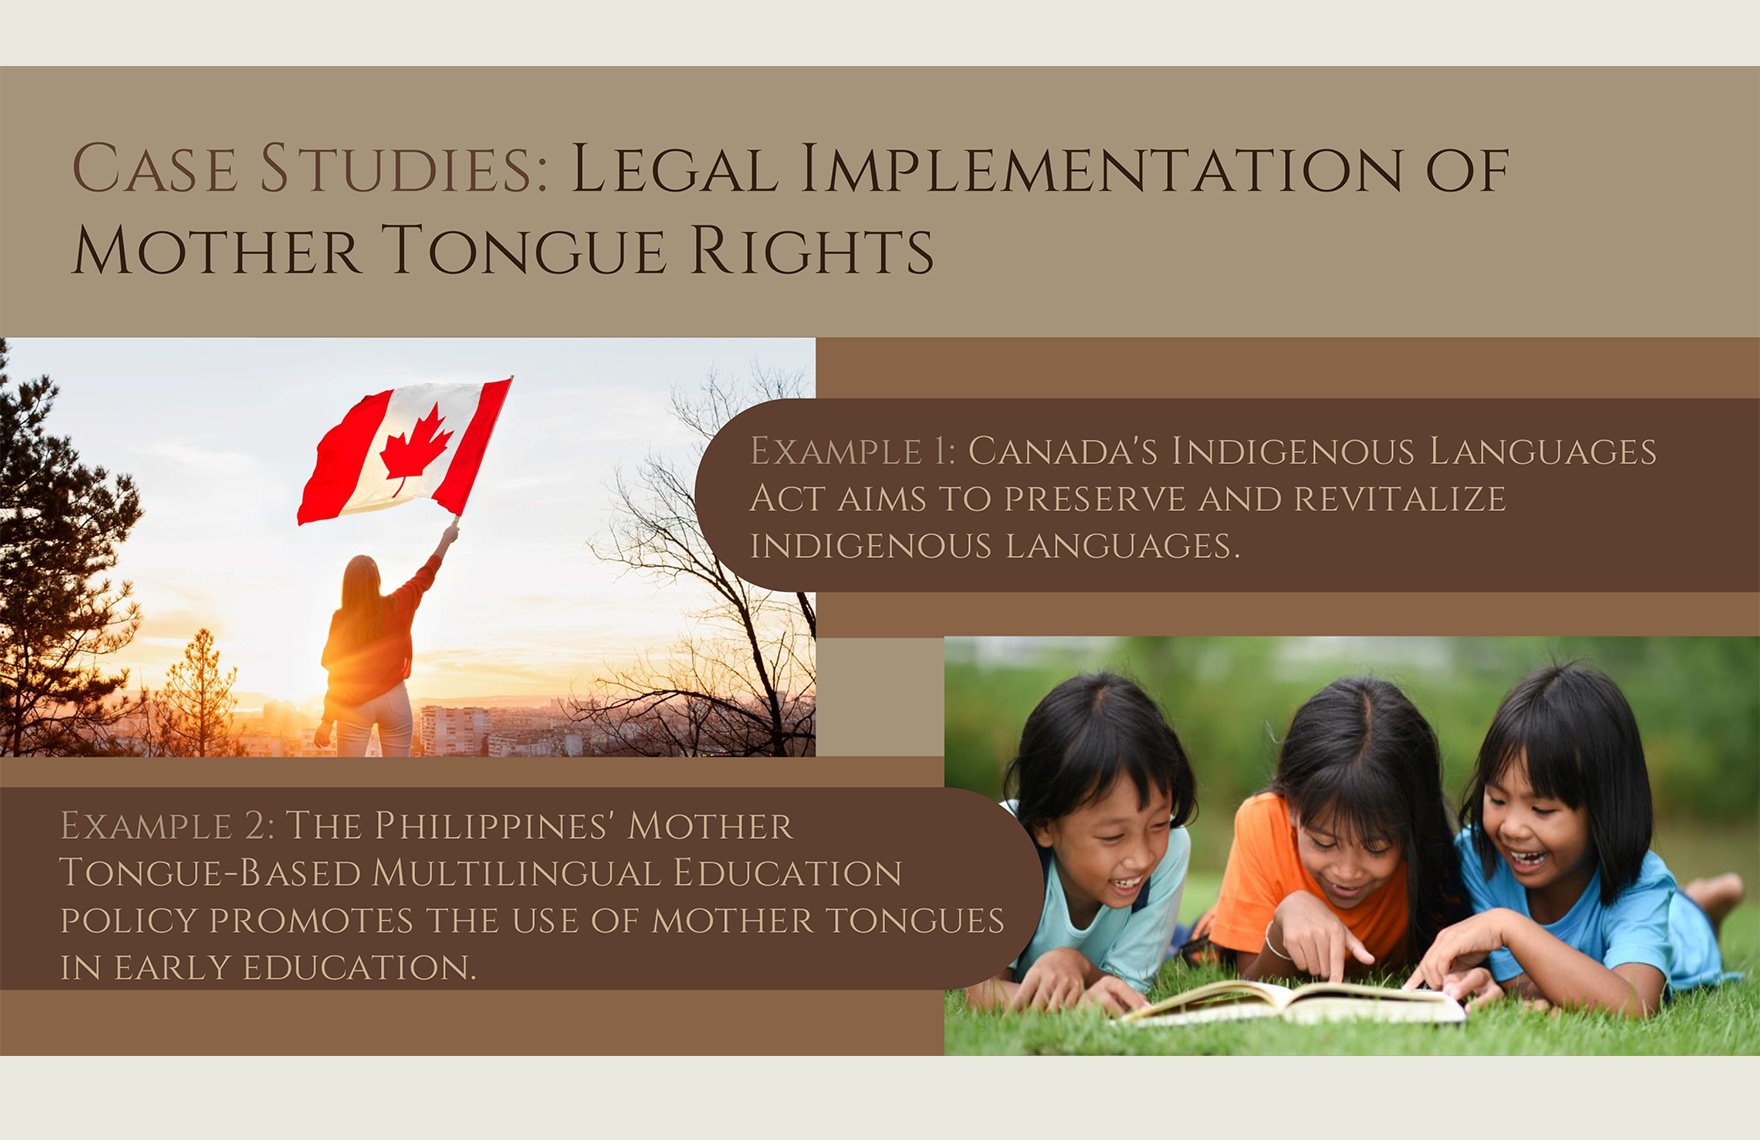 Legal Bases of Mother Tongue PPT Template